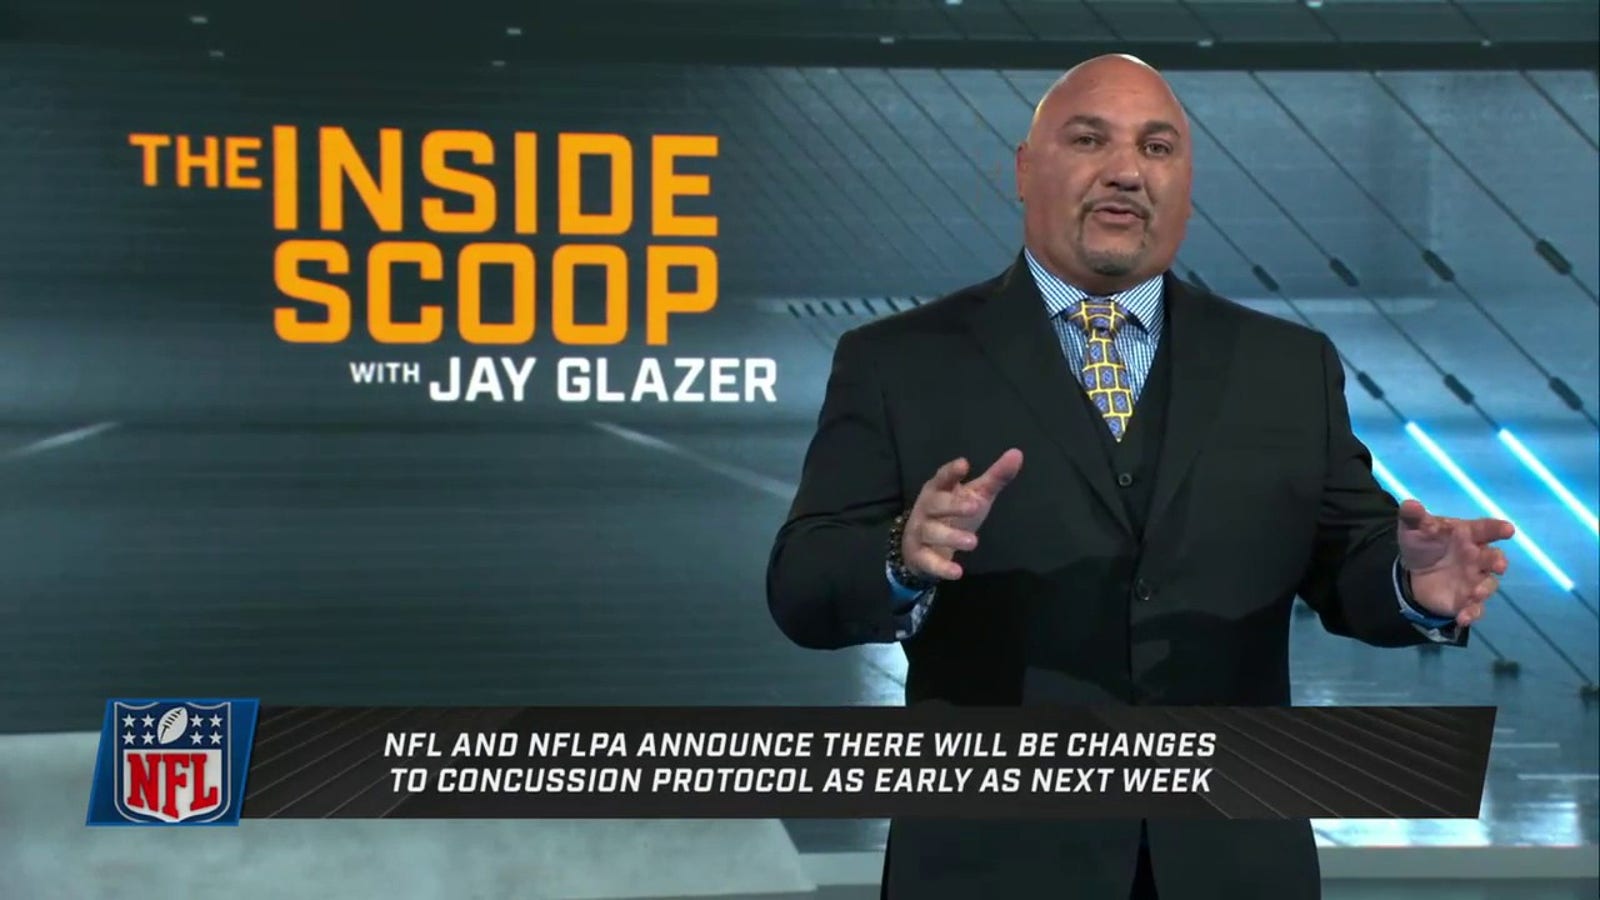 Jay Glazer talks NFL and NFLPA changes to the concussion protocol following Tua Tagovailoa's injuries